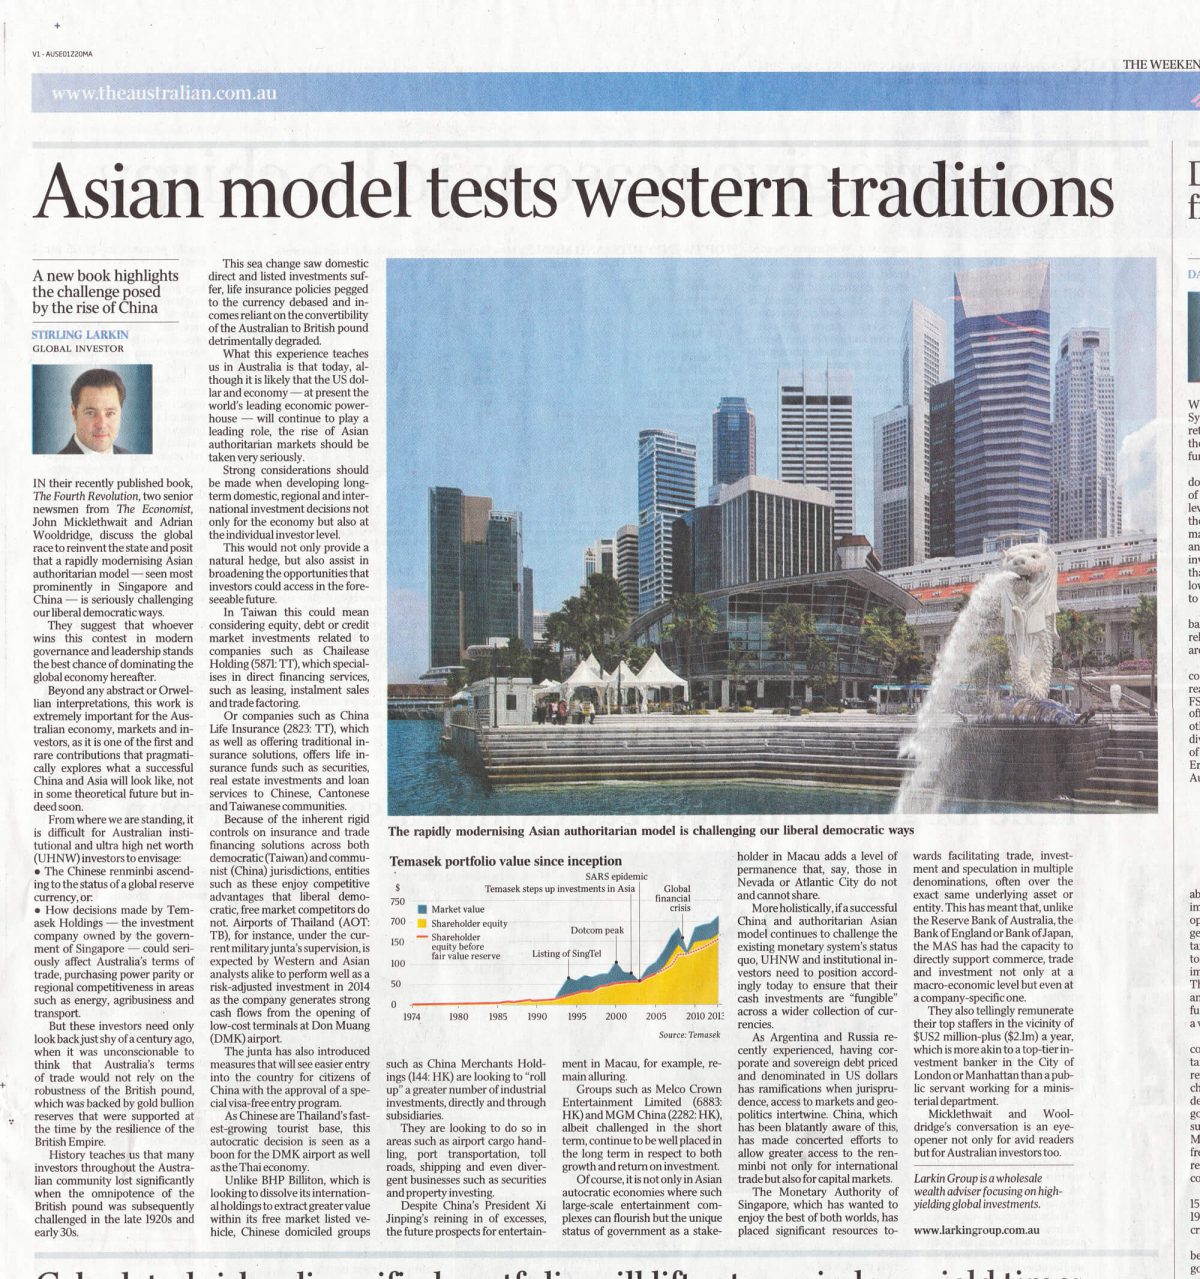 australian standfirst discusses markets in asia in 2014 in the australian newspaper